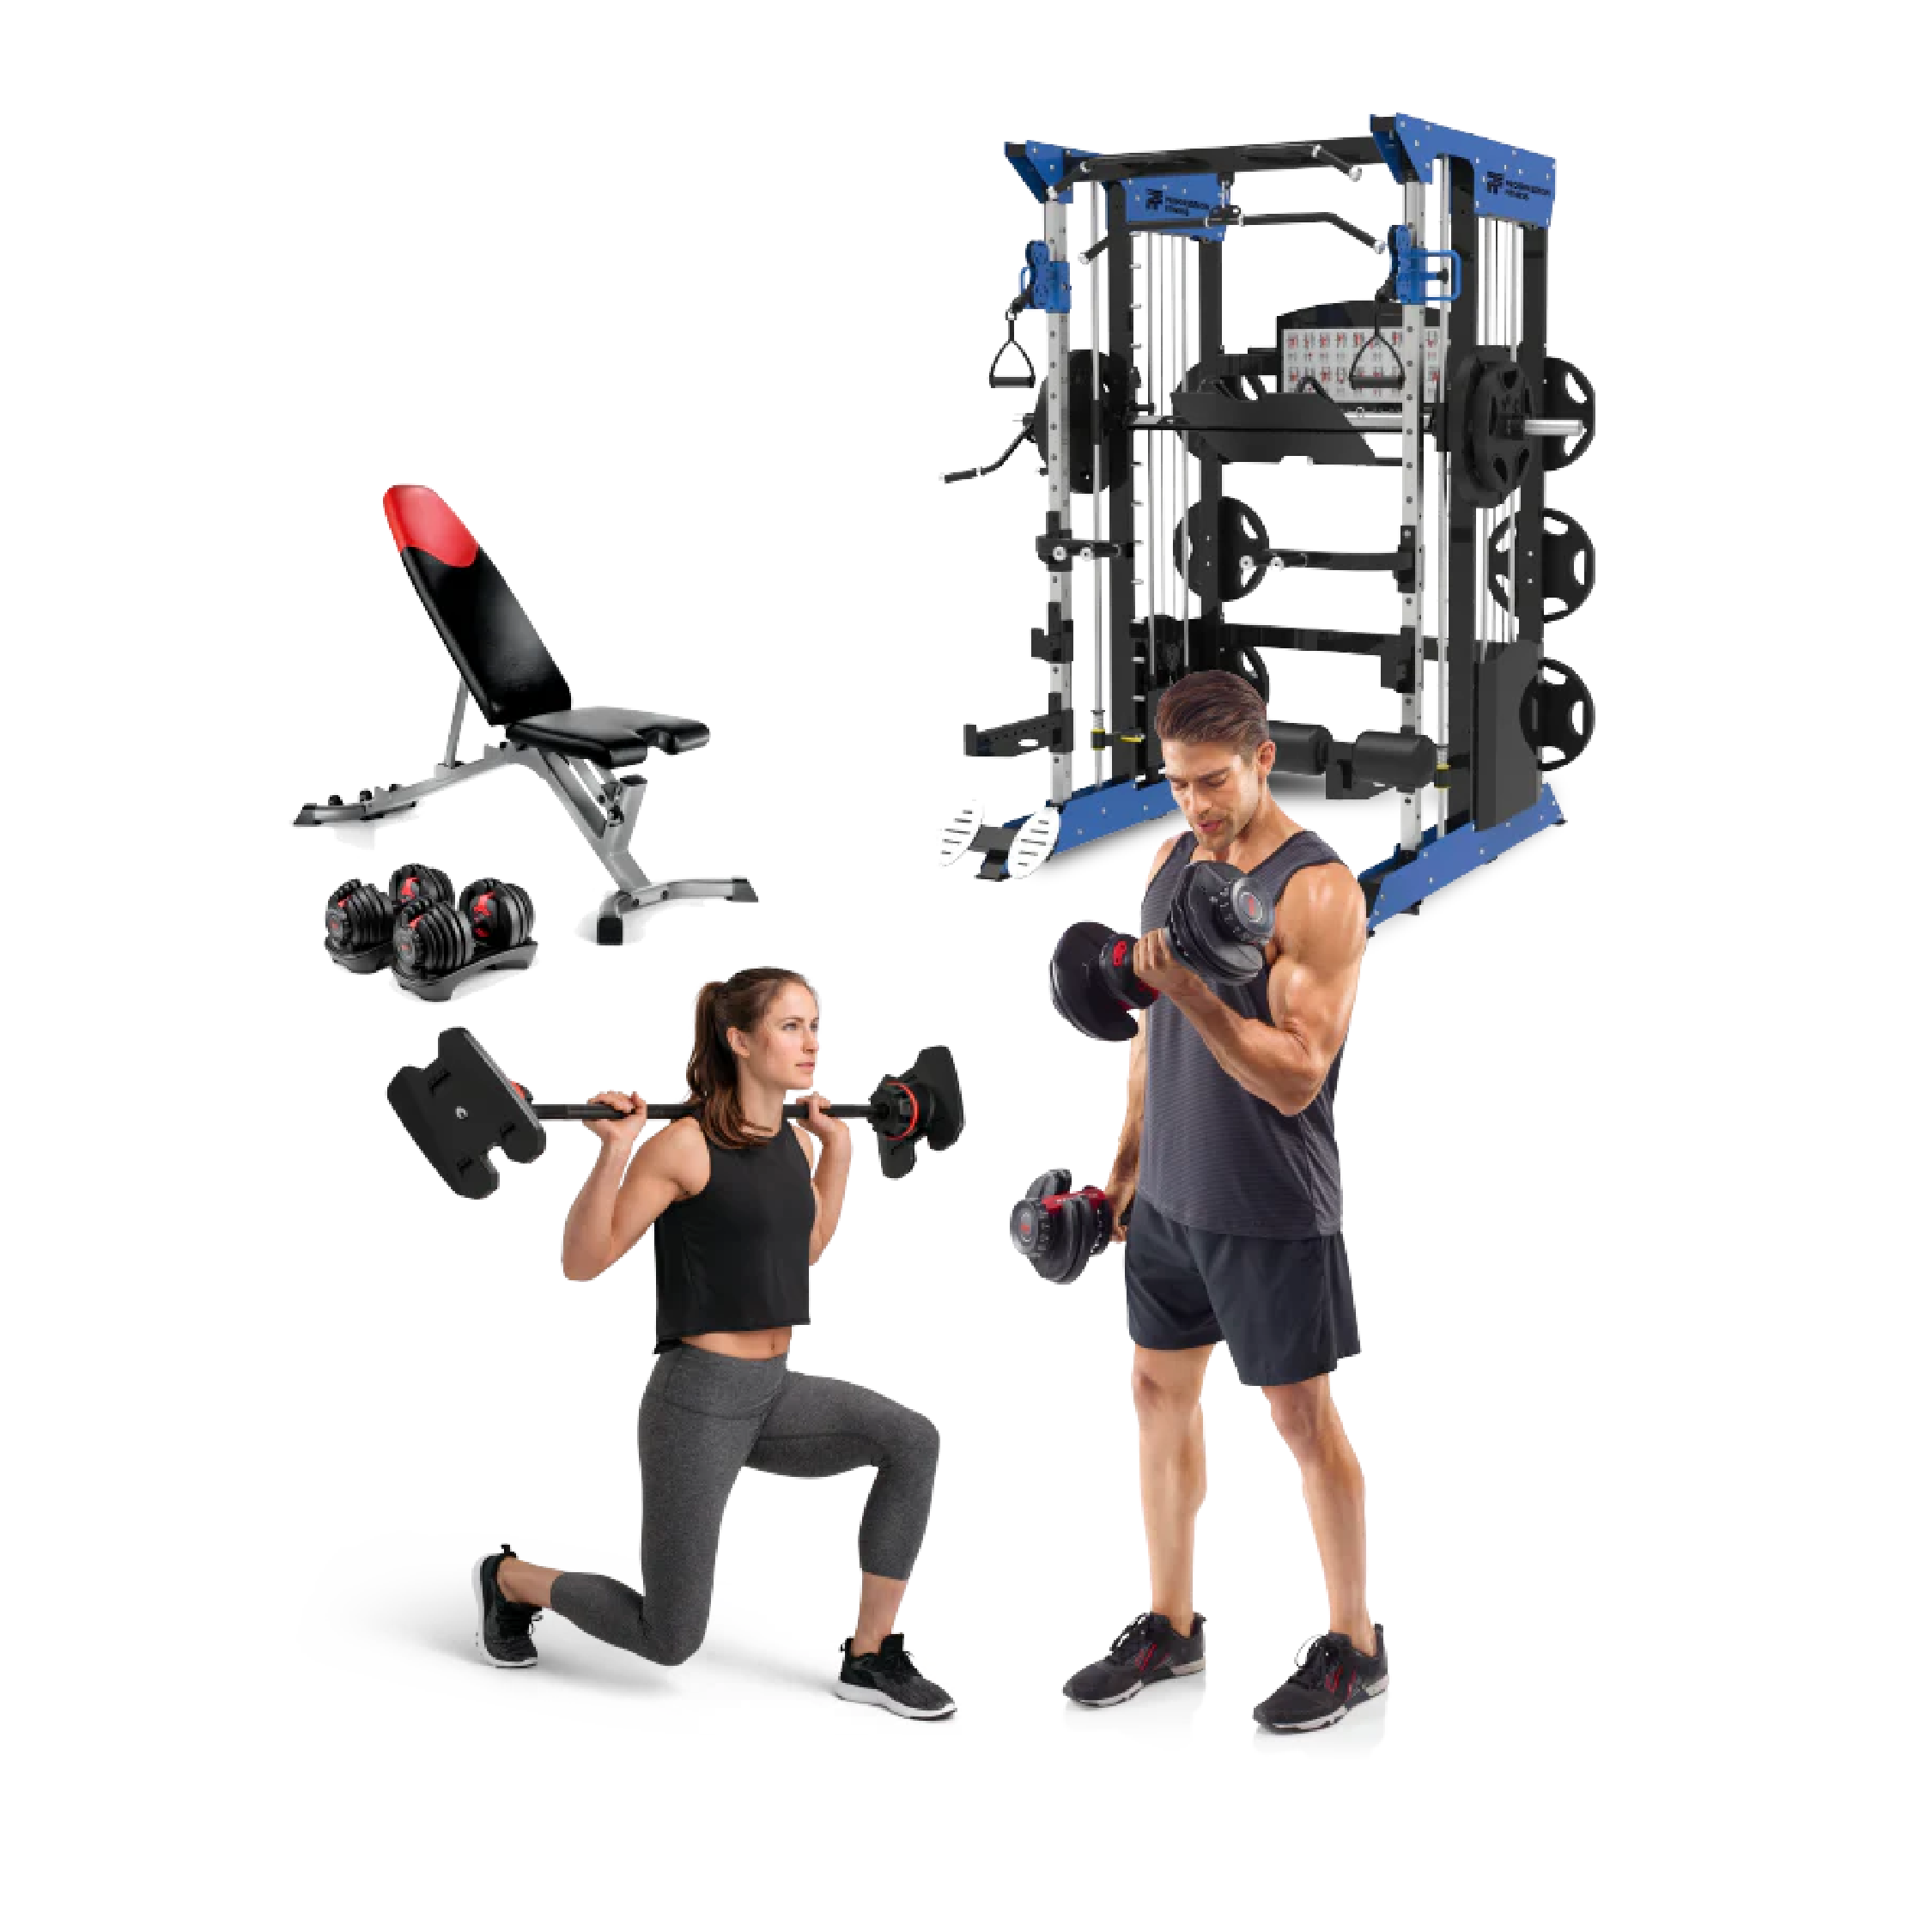 Gym station with people lifting weights, bench, and dumbbells.